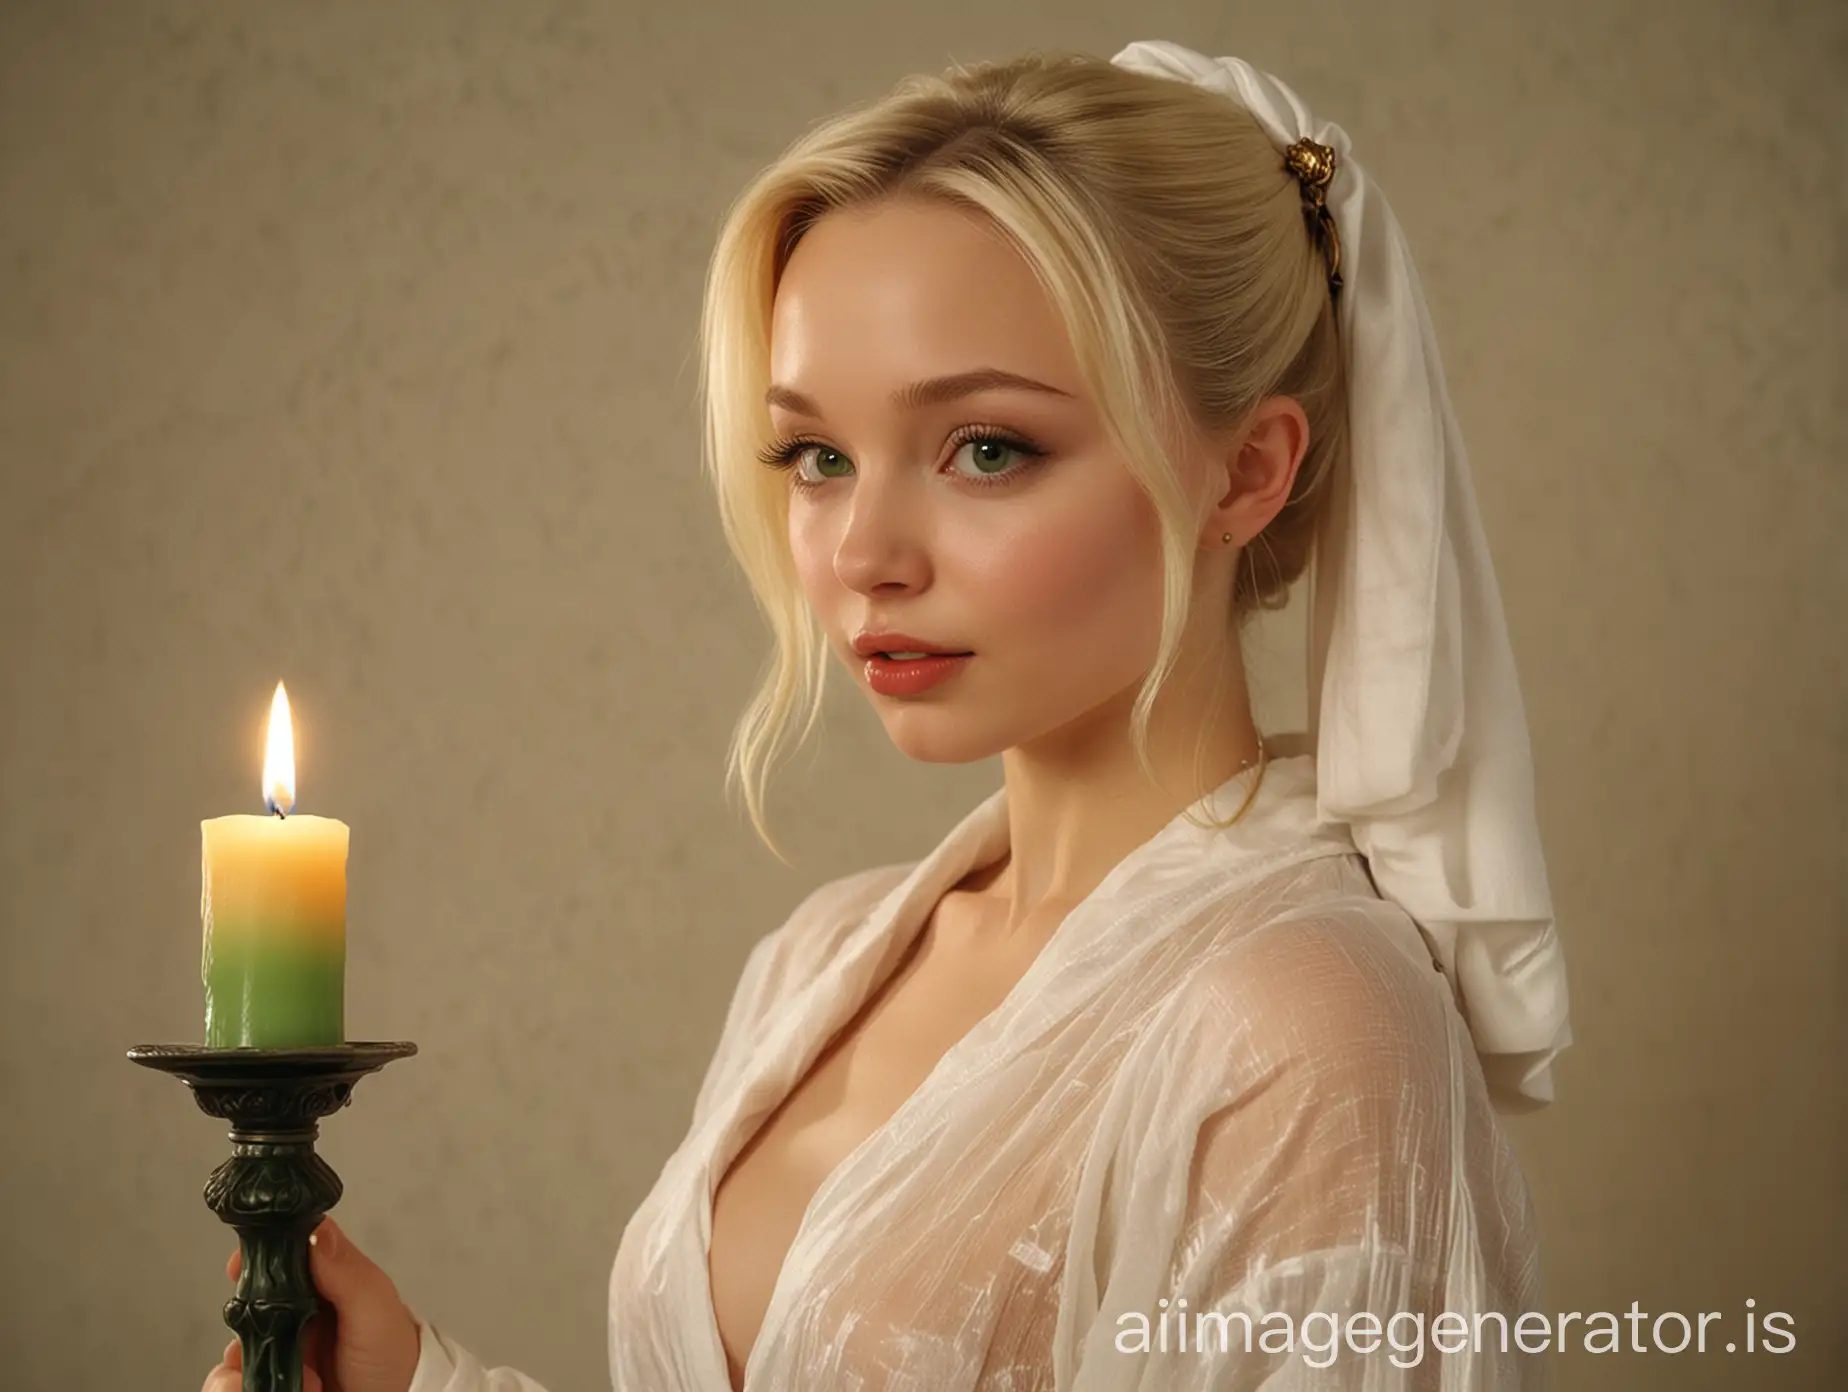 Entire-Body Photo of a Woman in Profile, German Descent, Mid-Twenties, Blond Hair, Green Eyes, 1980s era facial features with similarities to actress "Dove Cameron, Large Bosom, loosely tied white see-through gauzy robe with nothing on underneath, candlestick with a lit candle held out high in front of her.